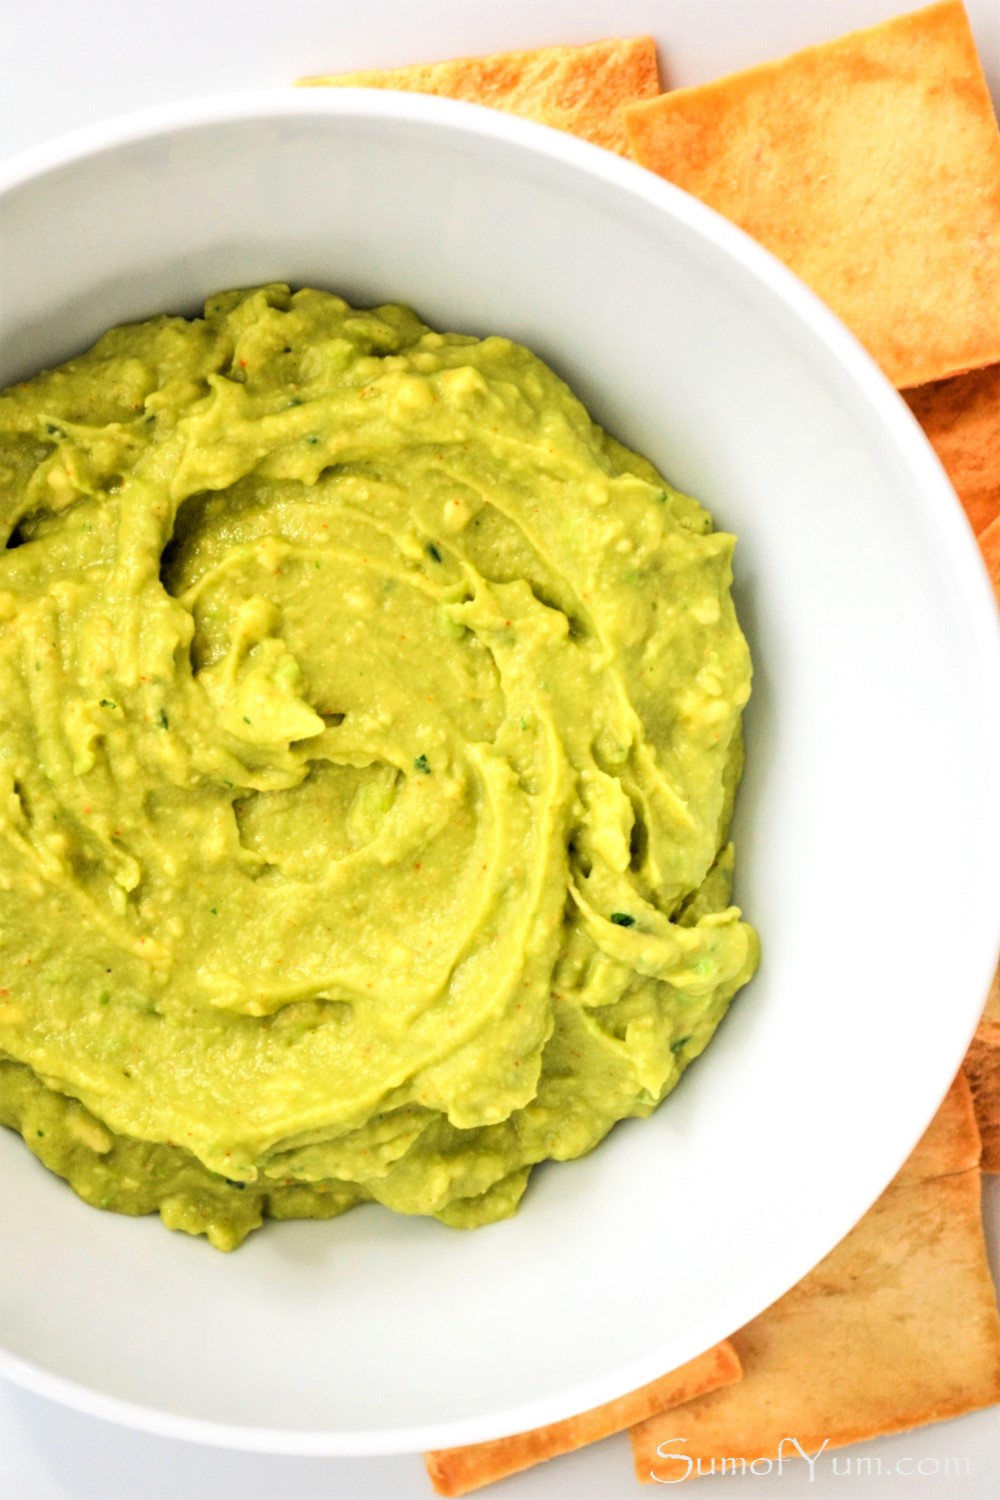 Creamy Avocado Dip and Chips